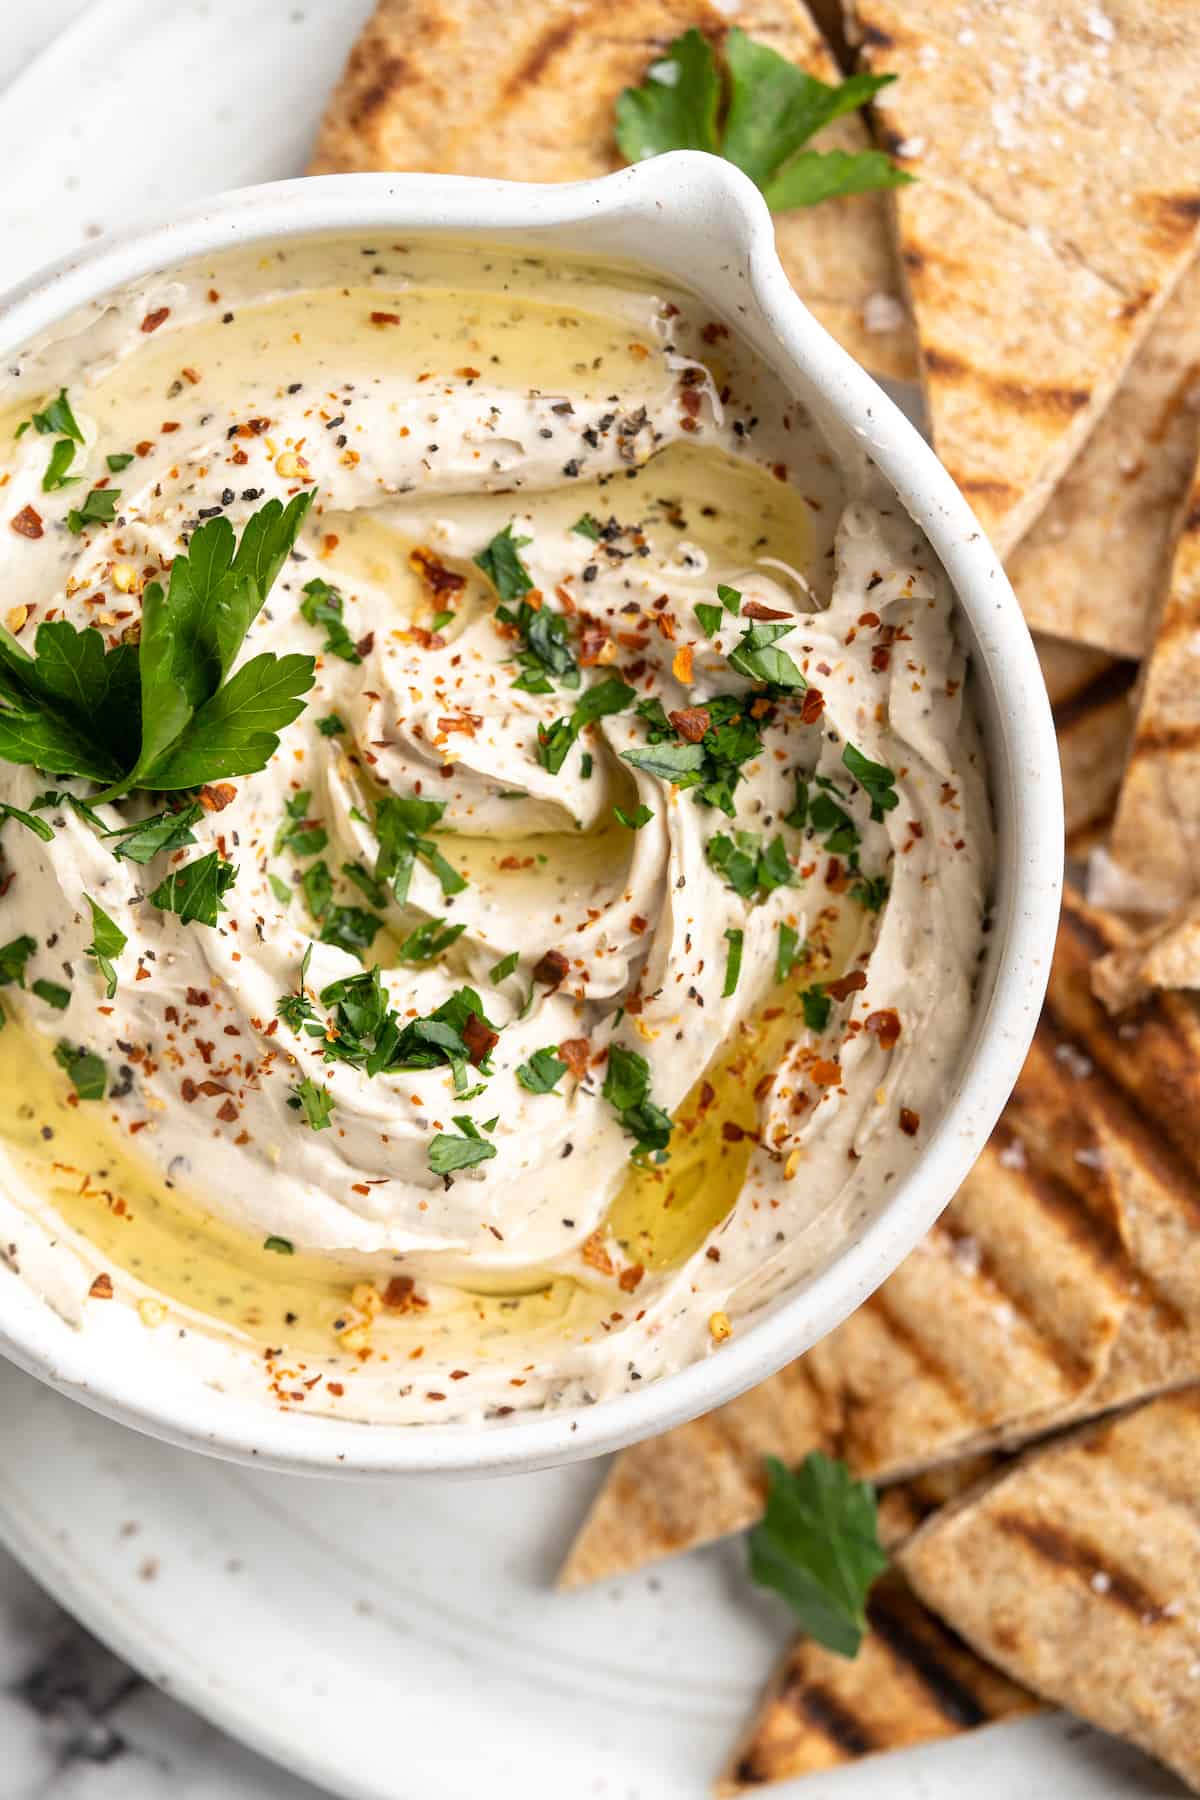 Overhead view of vegan whipped feta dip in bowl on platter of grilled pita chips